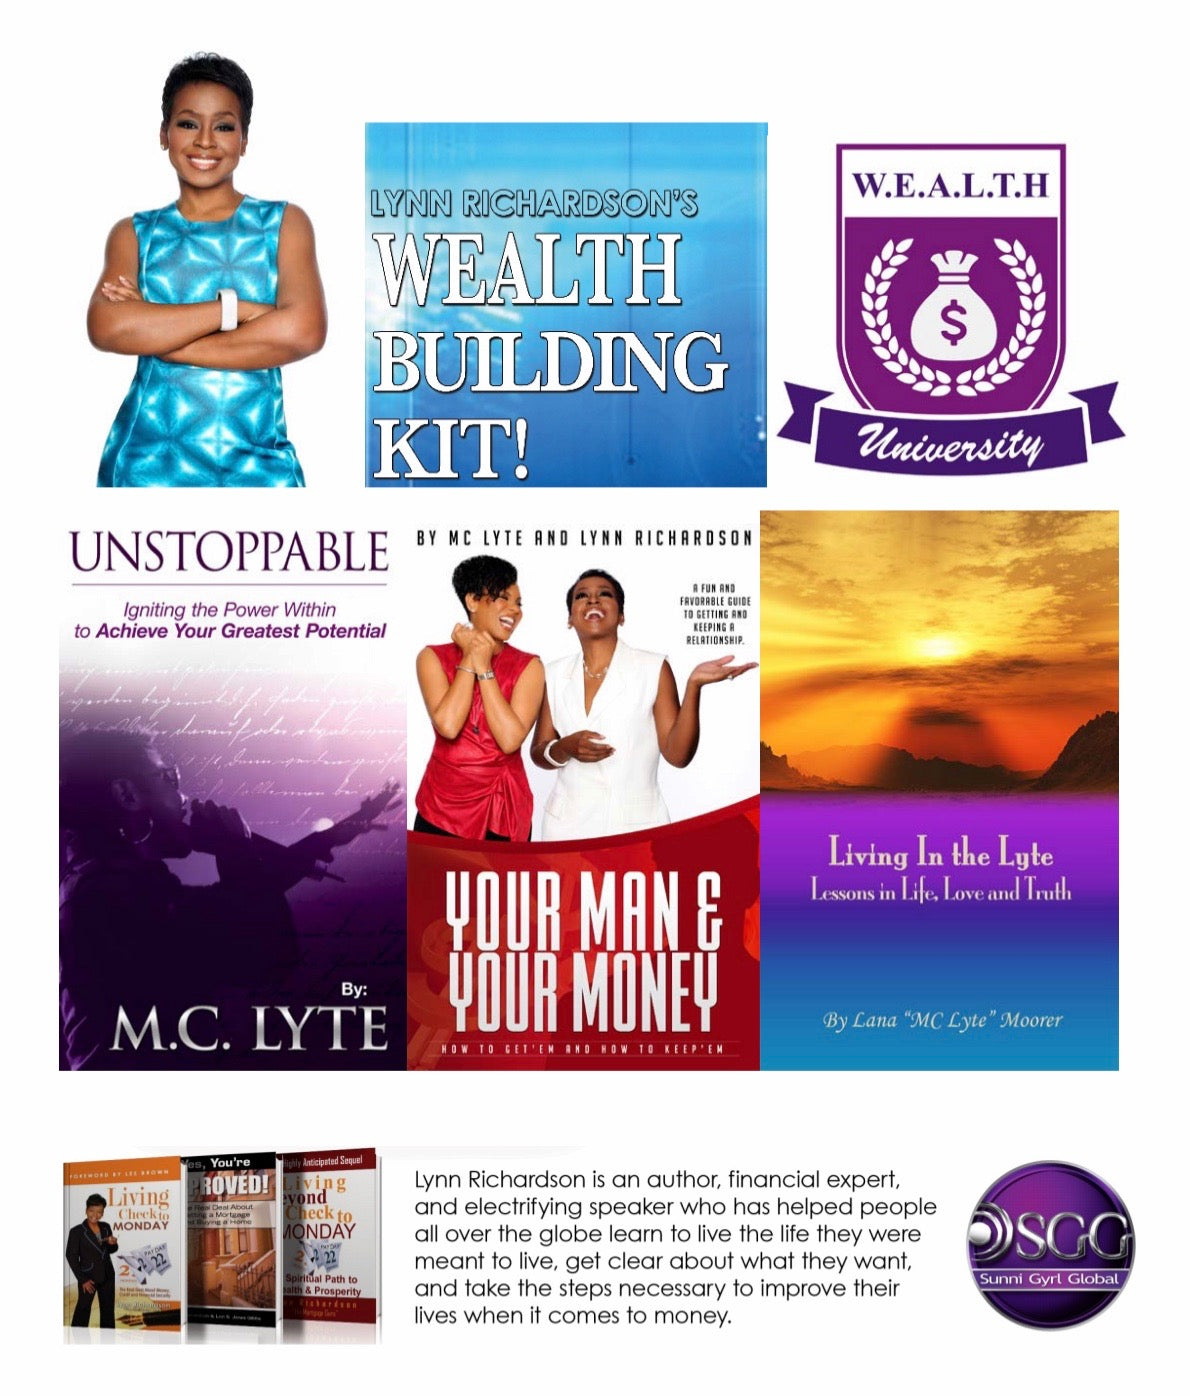 W.E.A.L.T.H.y Life Kit: Financial Vision of Perfection